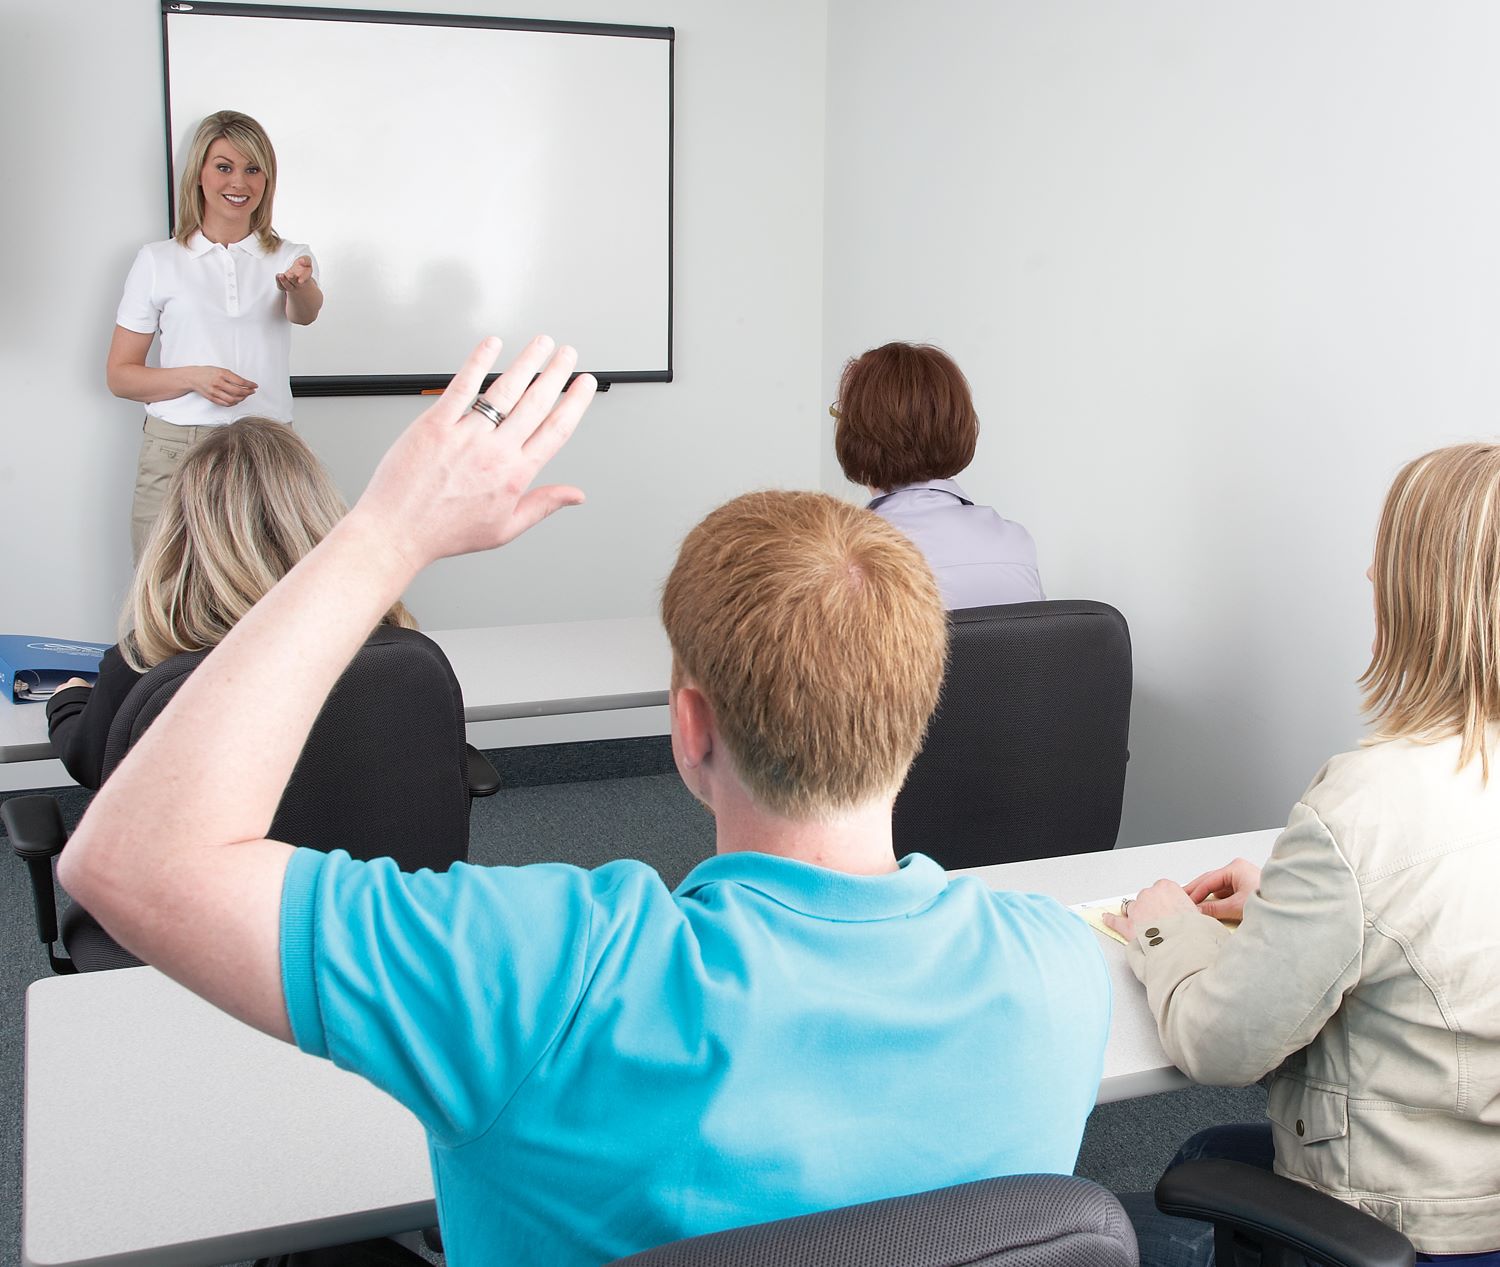 Are you and your employees meeting required training 